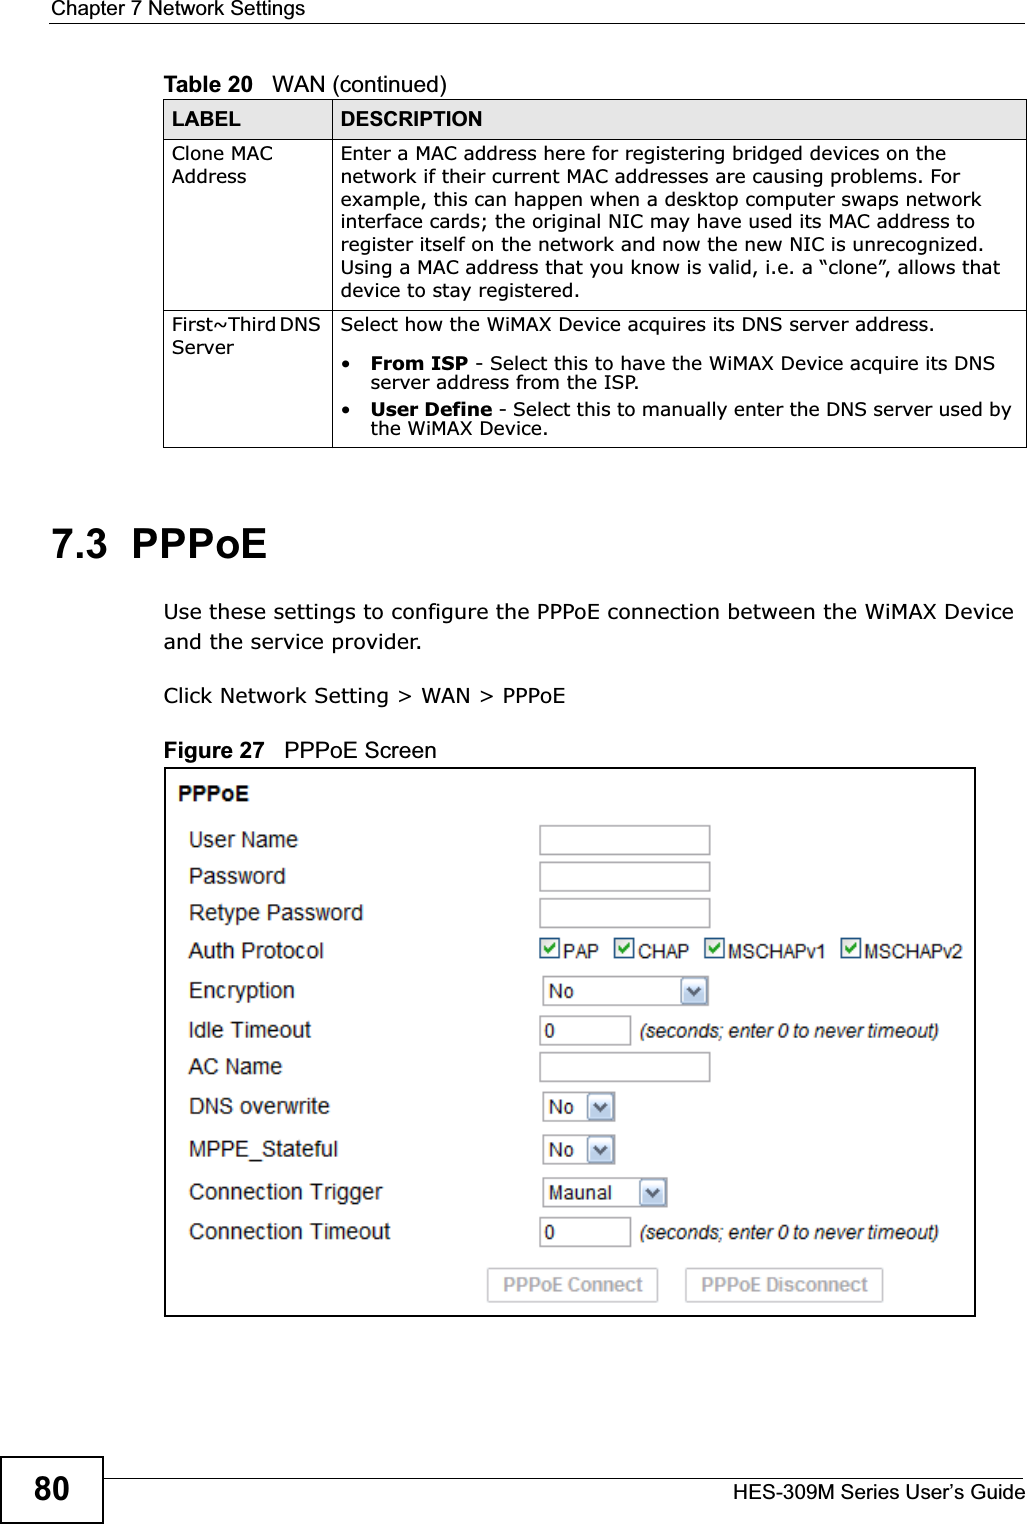 Chapter 7 Network SettingsHES-309M Series User’s Guide807.3  PPPoEUse these settings to configure the PPPoE connection between the WiMAX Device and the service provider.Click Network Setting &gt; WAN &gt; PPPoEFigure 27   PPPoE ScreenClone MAC AddressEnter a MAC address here for registering bridged devices on the network if their current MAC addresses are causing problems. For example, this can happen when a desktop computer swaps network interface cards; the original NIC may have used its MAC address to register itself on the network and now the new NIC is unrecognized. Using a MAC address that you know is valid, i.e. a “clone”, allows that device to stay registered.First~Third DNS ServerSelect how the WiMAX Device acquires its DNS server address.•From ISP - Select this to have the WiMAX Device acquire its DNS server address from the ISP.•User Define - Select this to manually enter the DNS server used by the WiMAX Device.Table 20   WAN (continued)LABEL DESCRIPTION